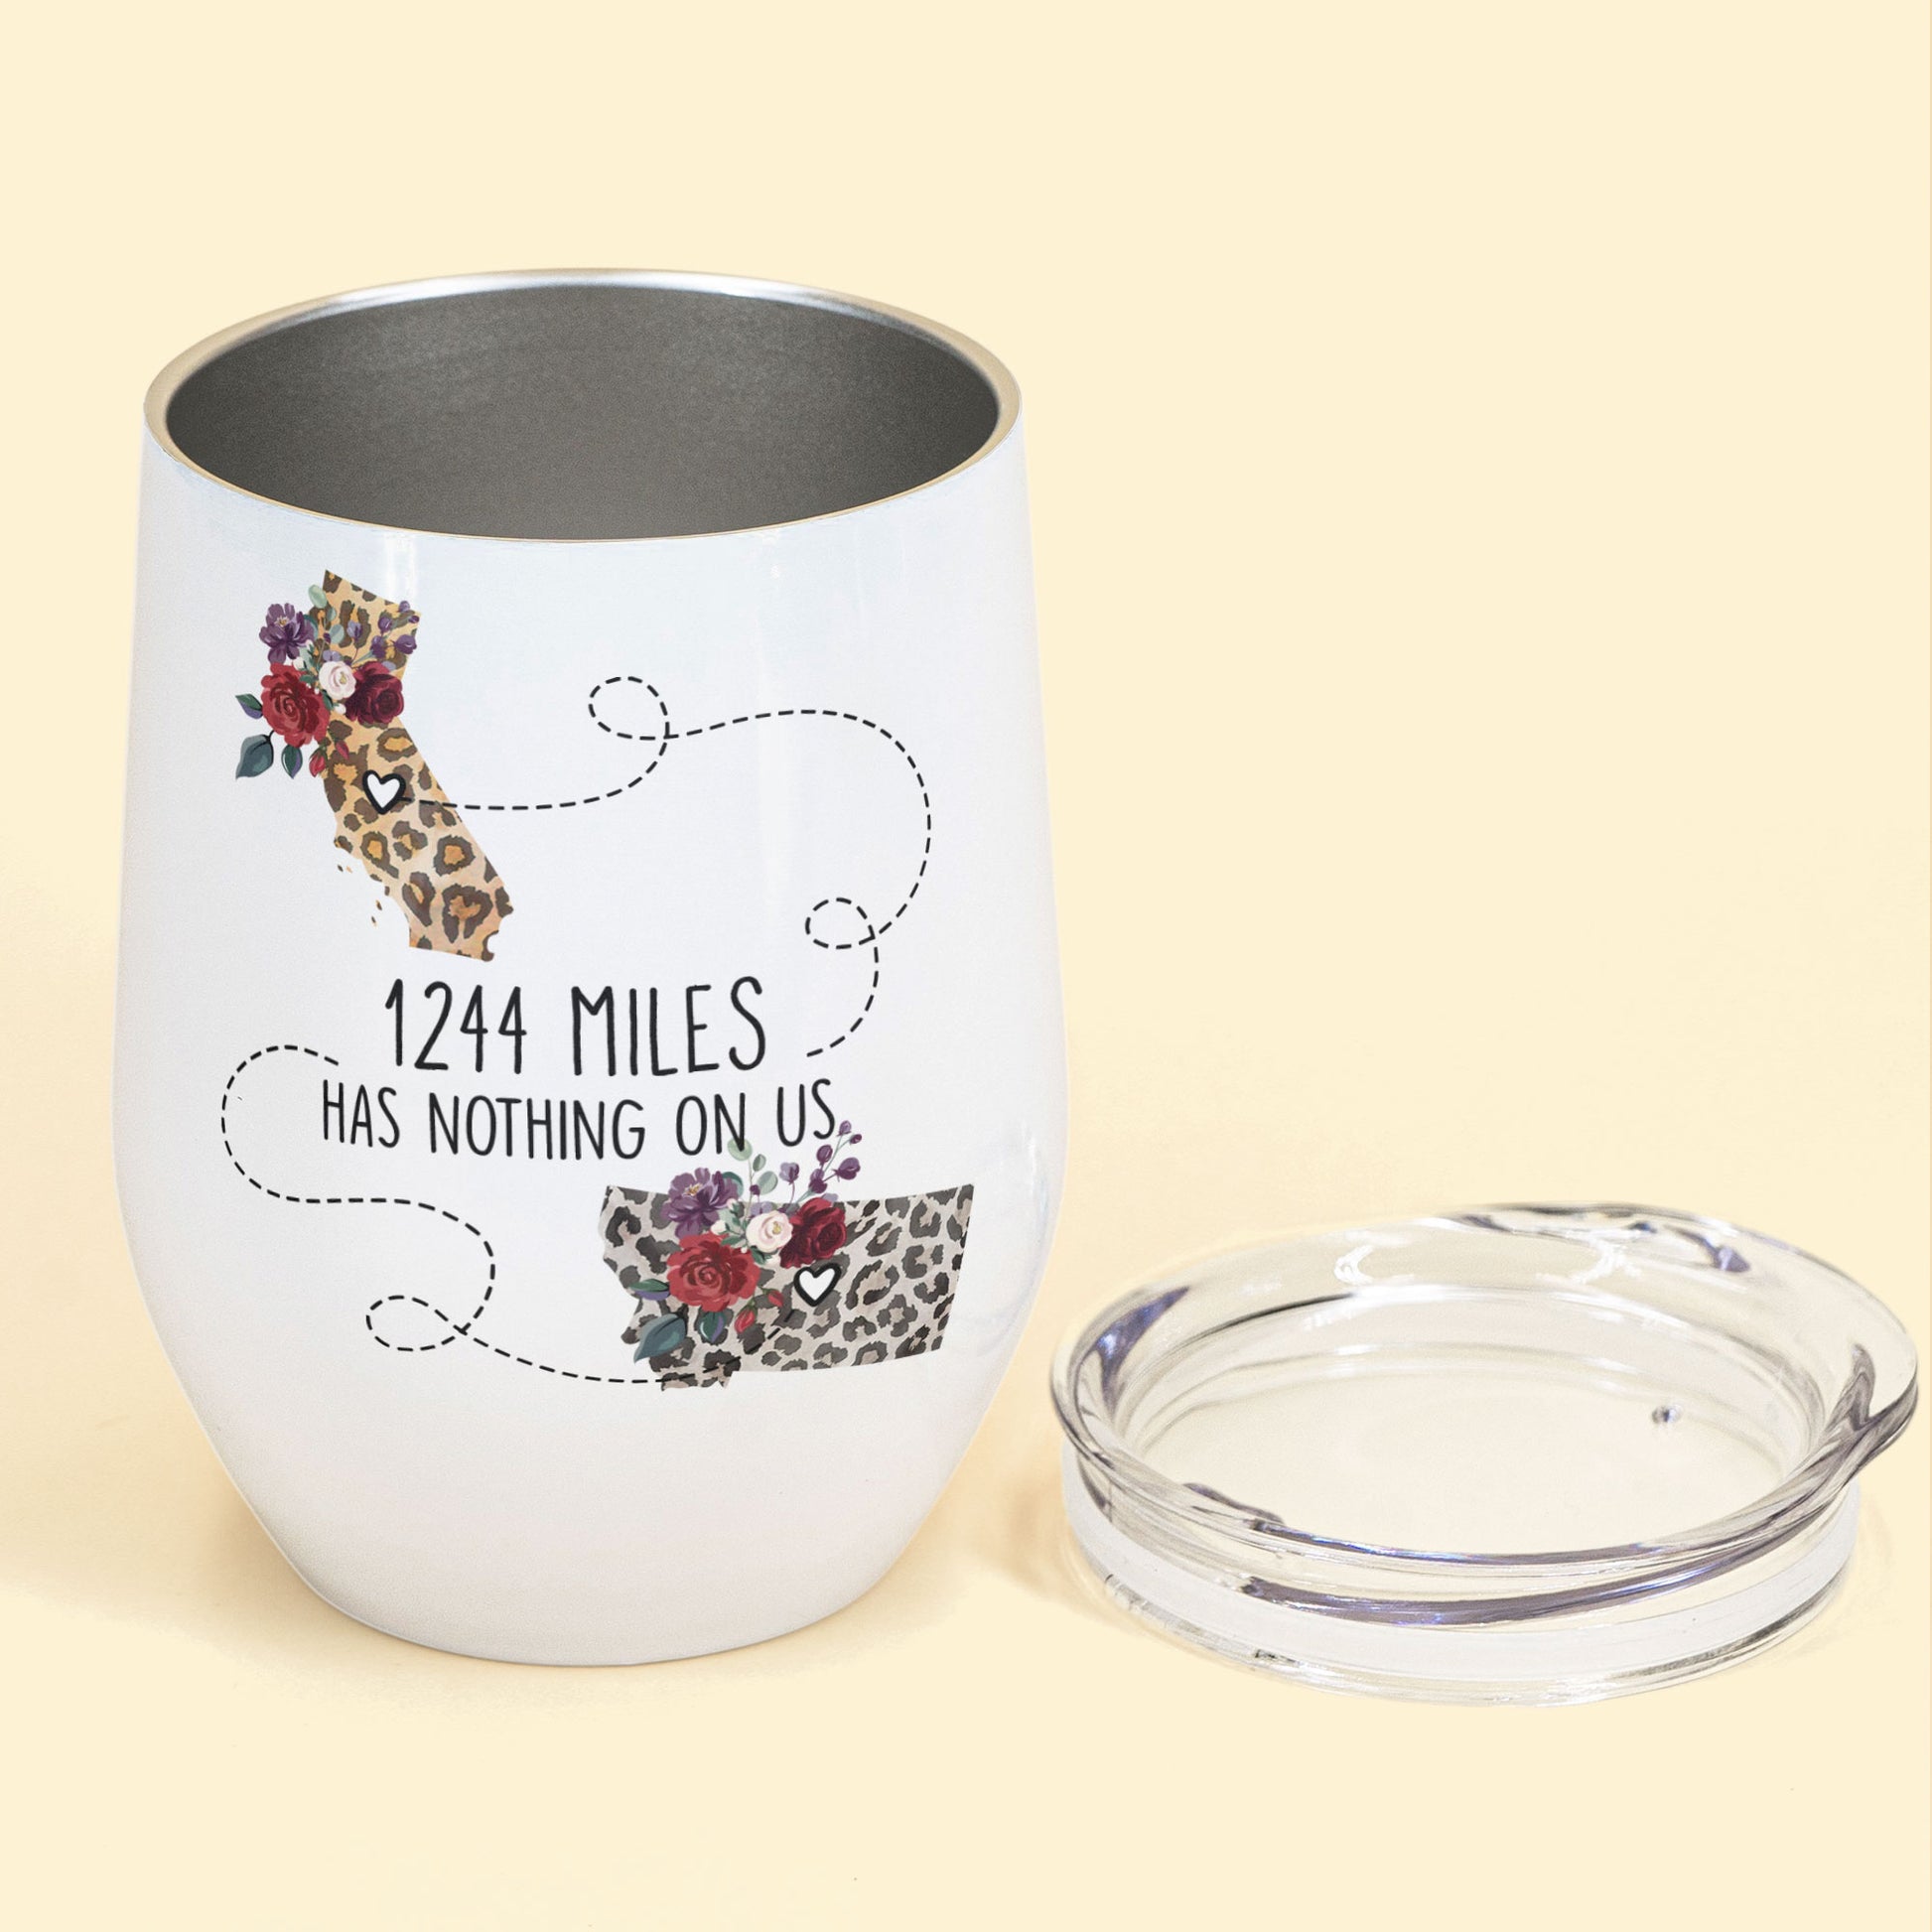 Miss Your Face - Personalized Wine Tumbler - Birthday Gift For Long Distance Friendship, Besties, Sisters